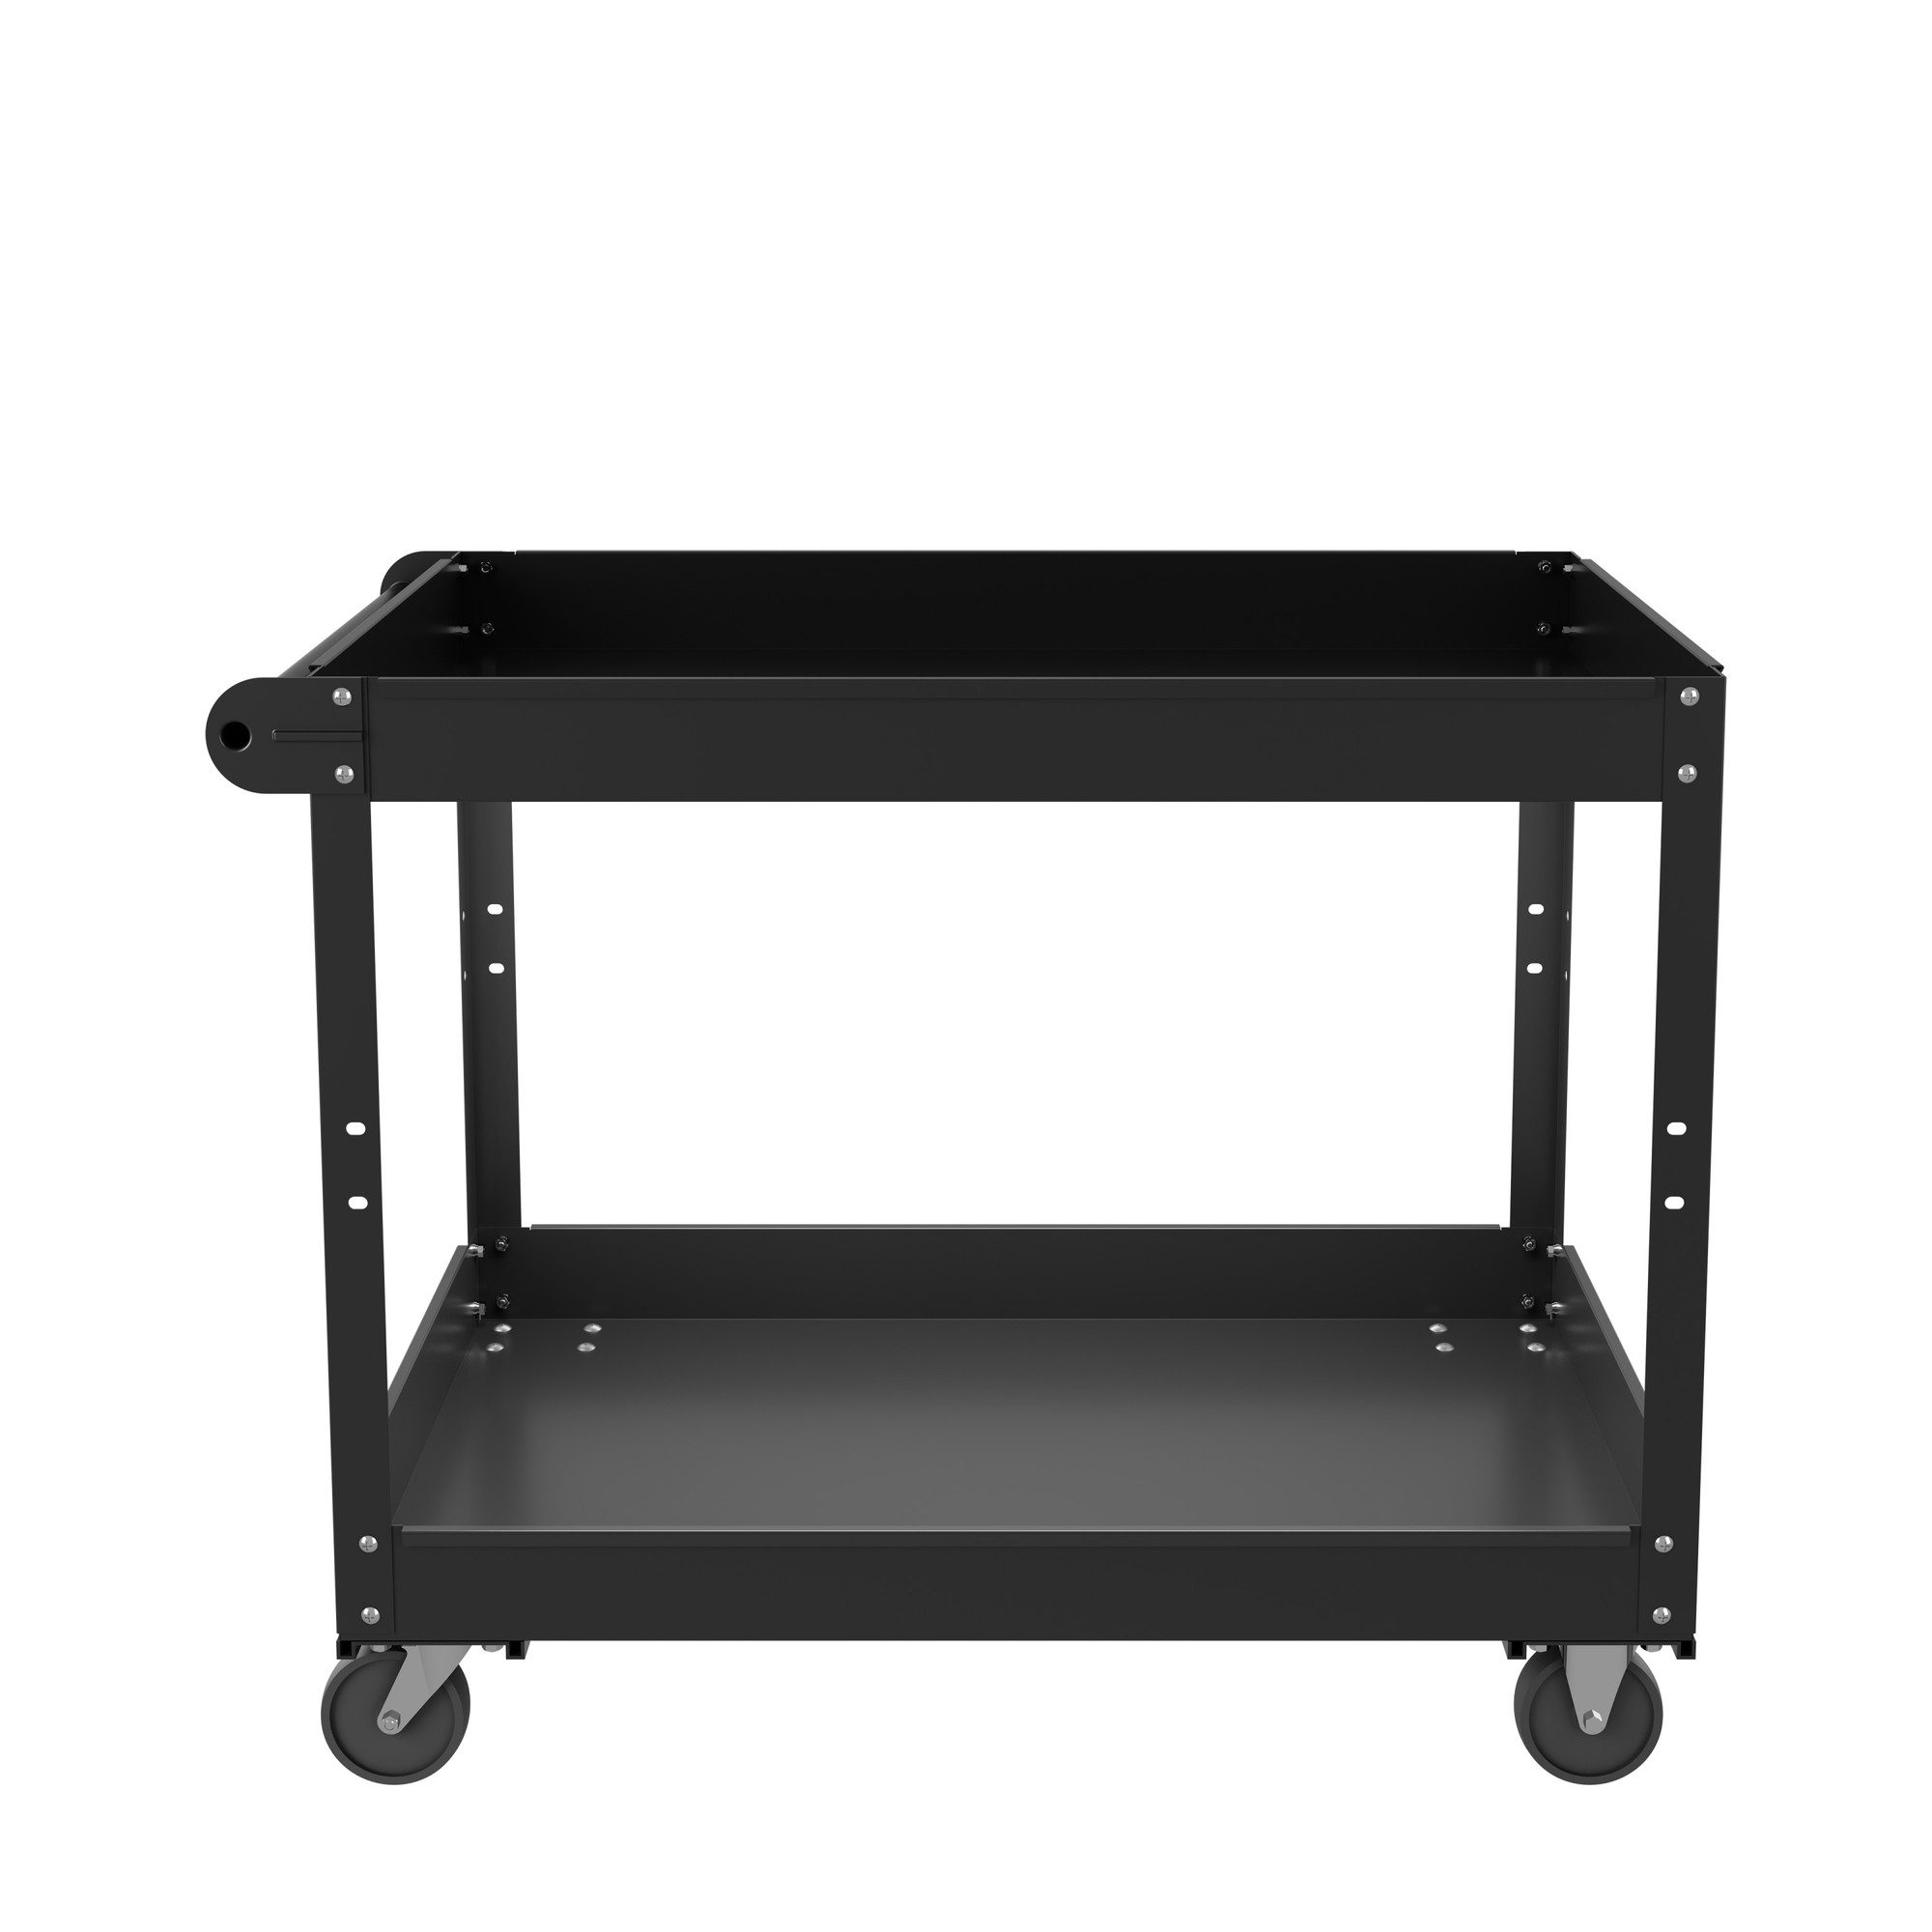 Hirsh Industries, 2 Shelf Ready-To-Assemble Steel Utility Cart, Color Black, Material Steel, Shelves (qty.) 2, Model 22641